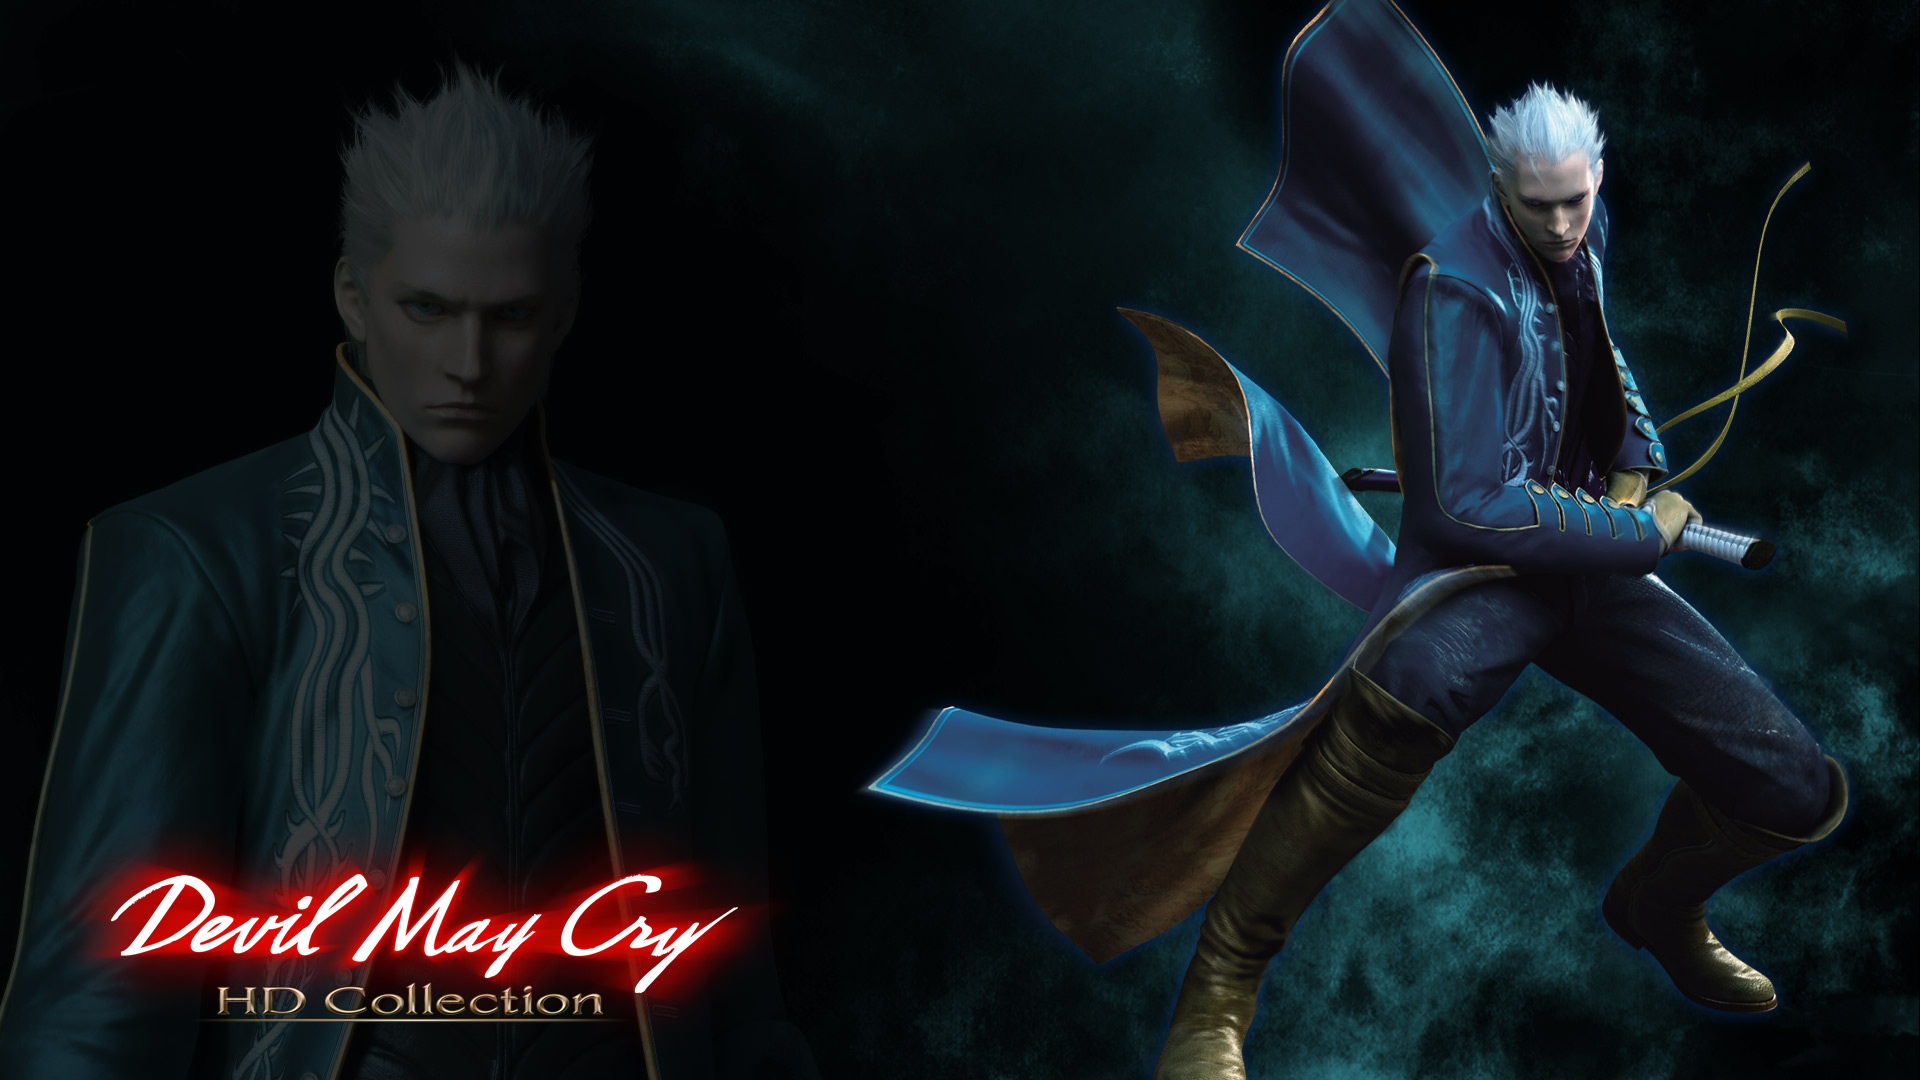 Showcase Devil May Cry Hd Collection